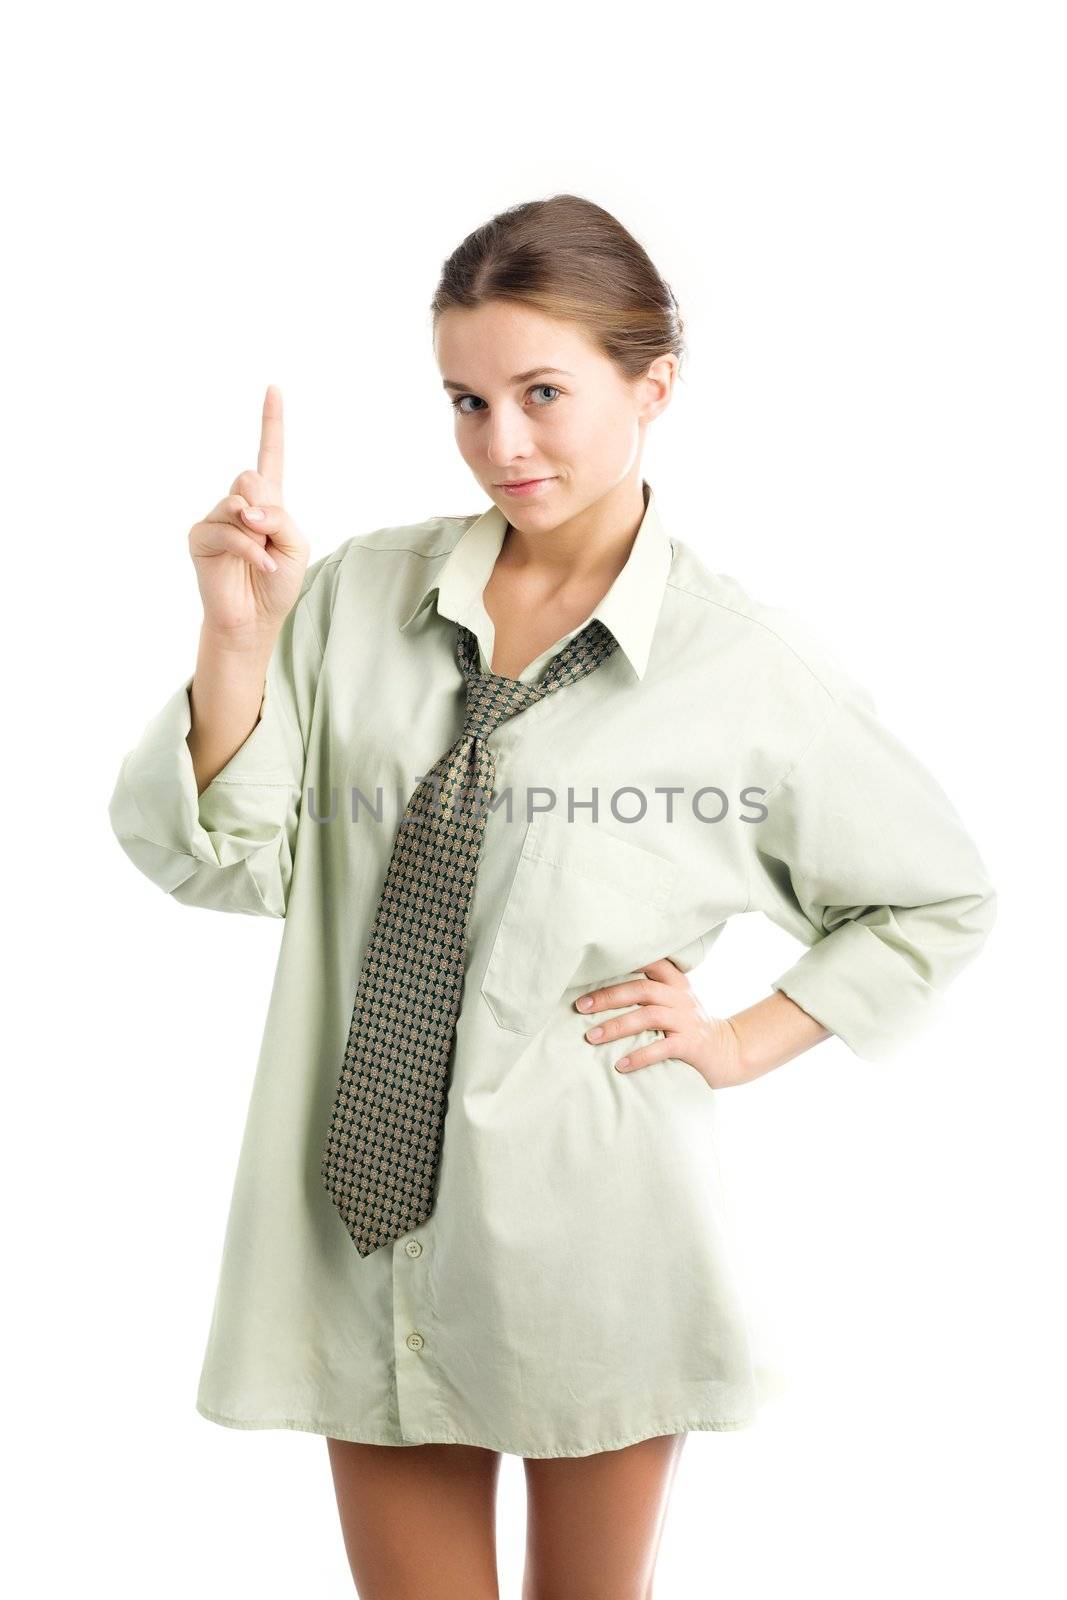 An image of a nice young girl in shirt